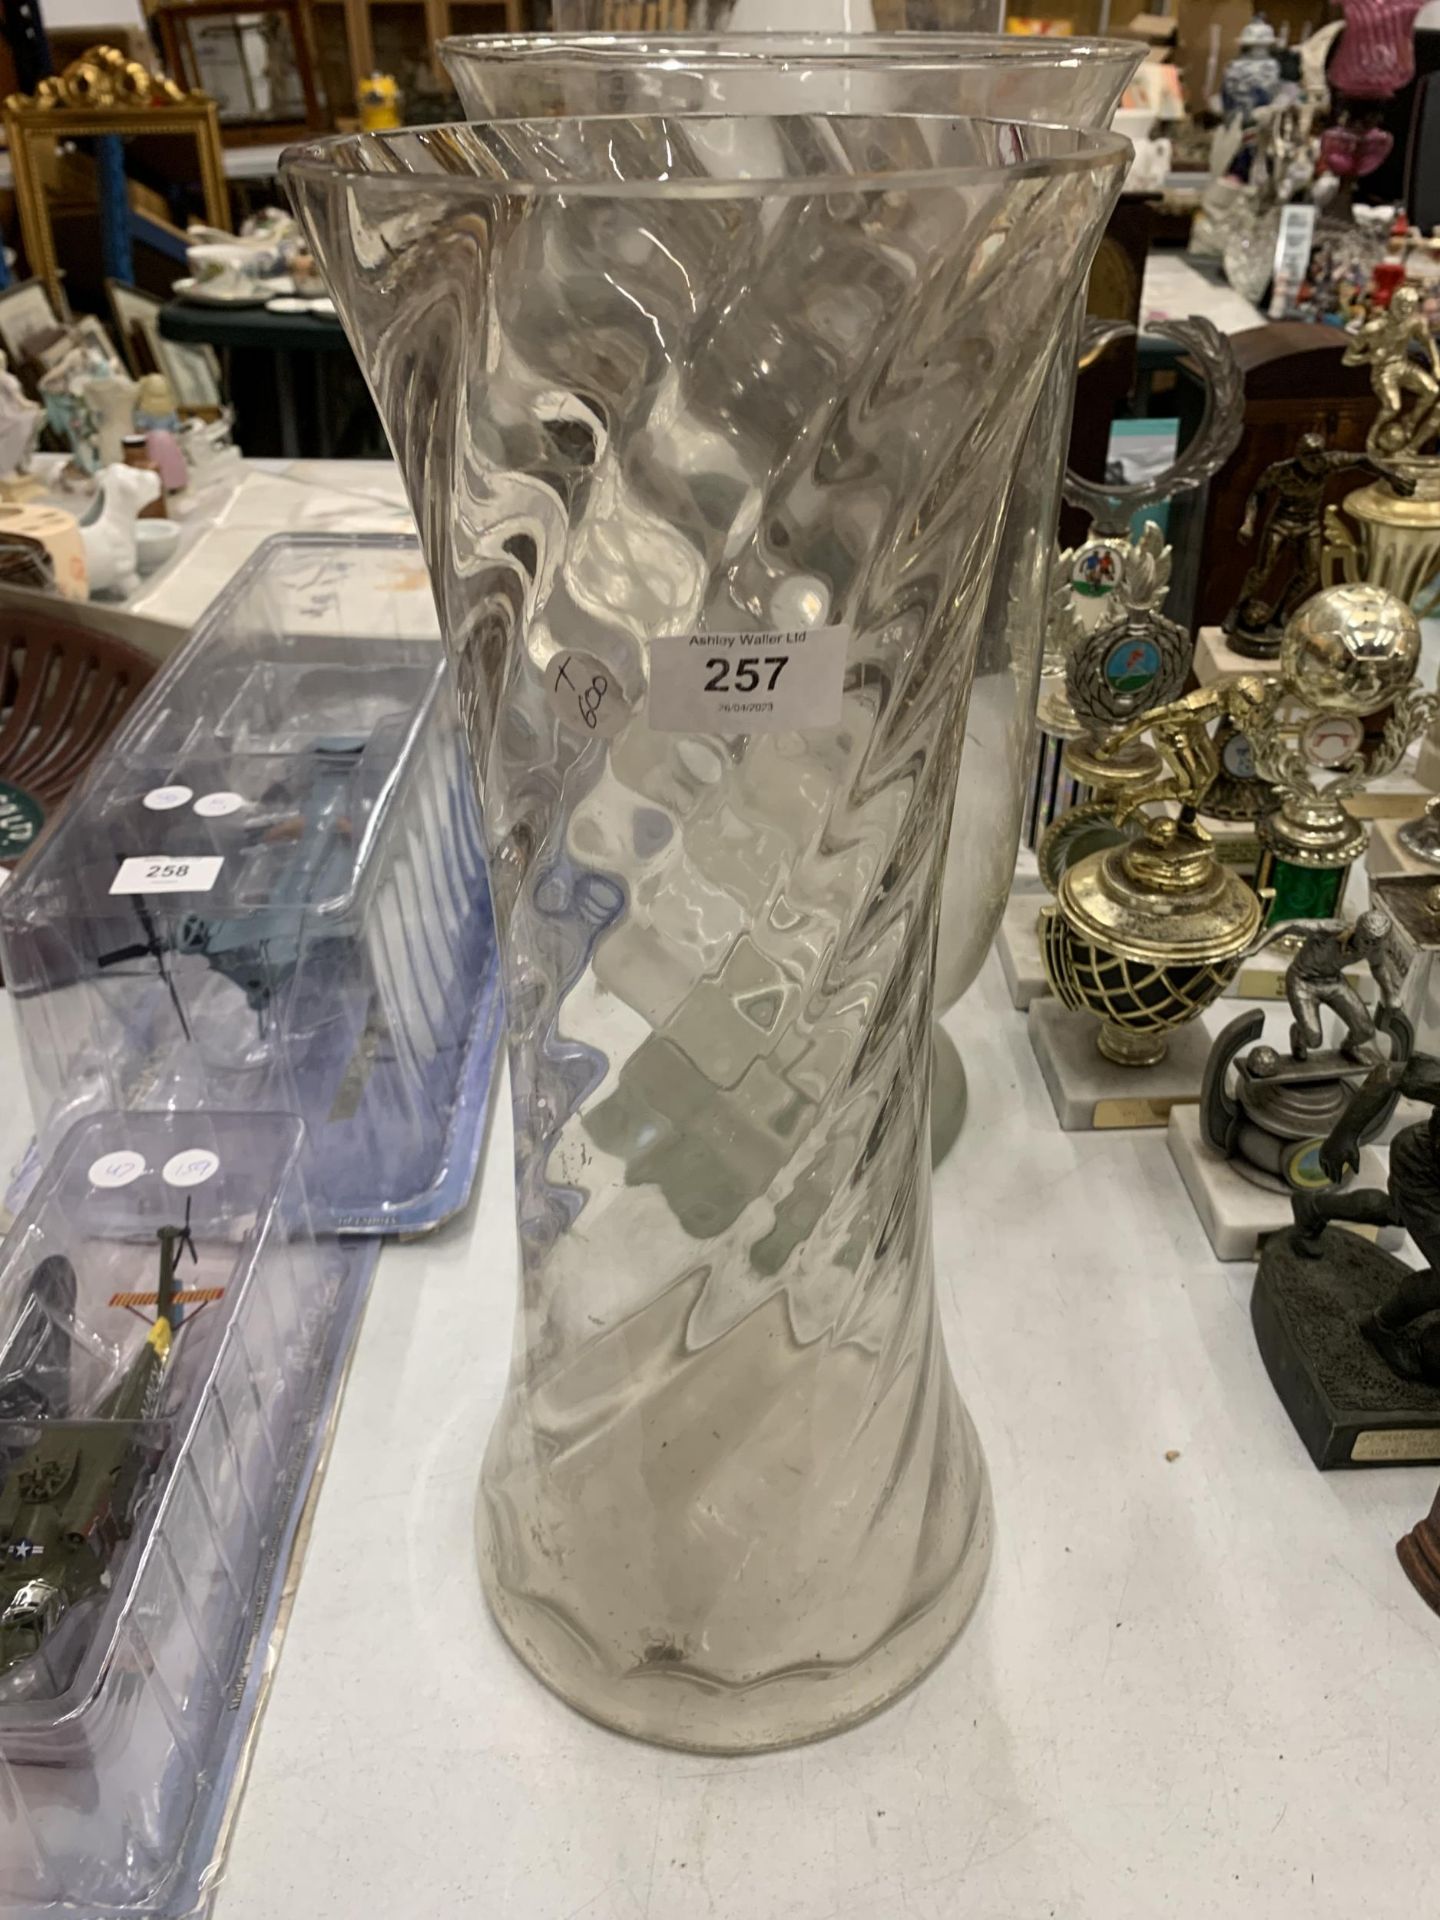 THREE LARGE CLEAR GLASS VASES TO INCLUDE TWIST DESIGN EXAMPLE - Image 2 of 4